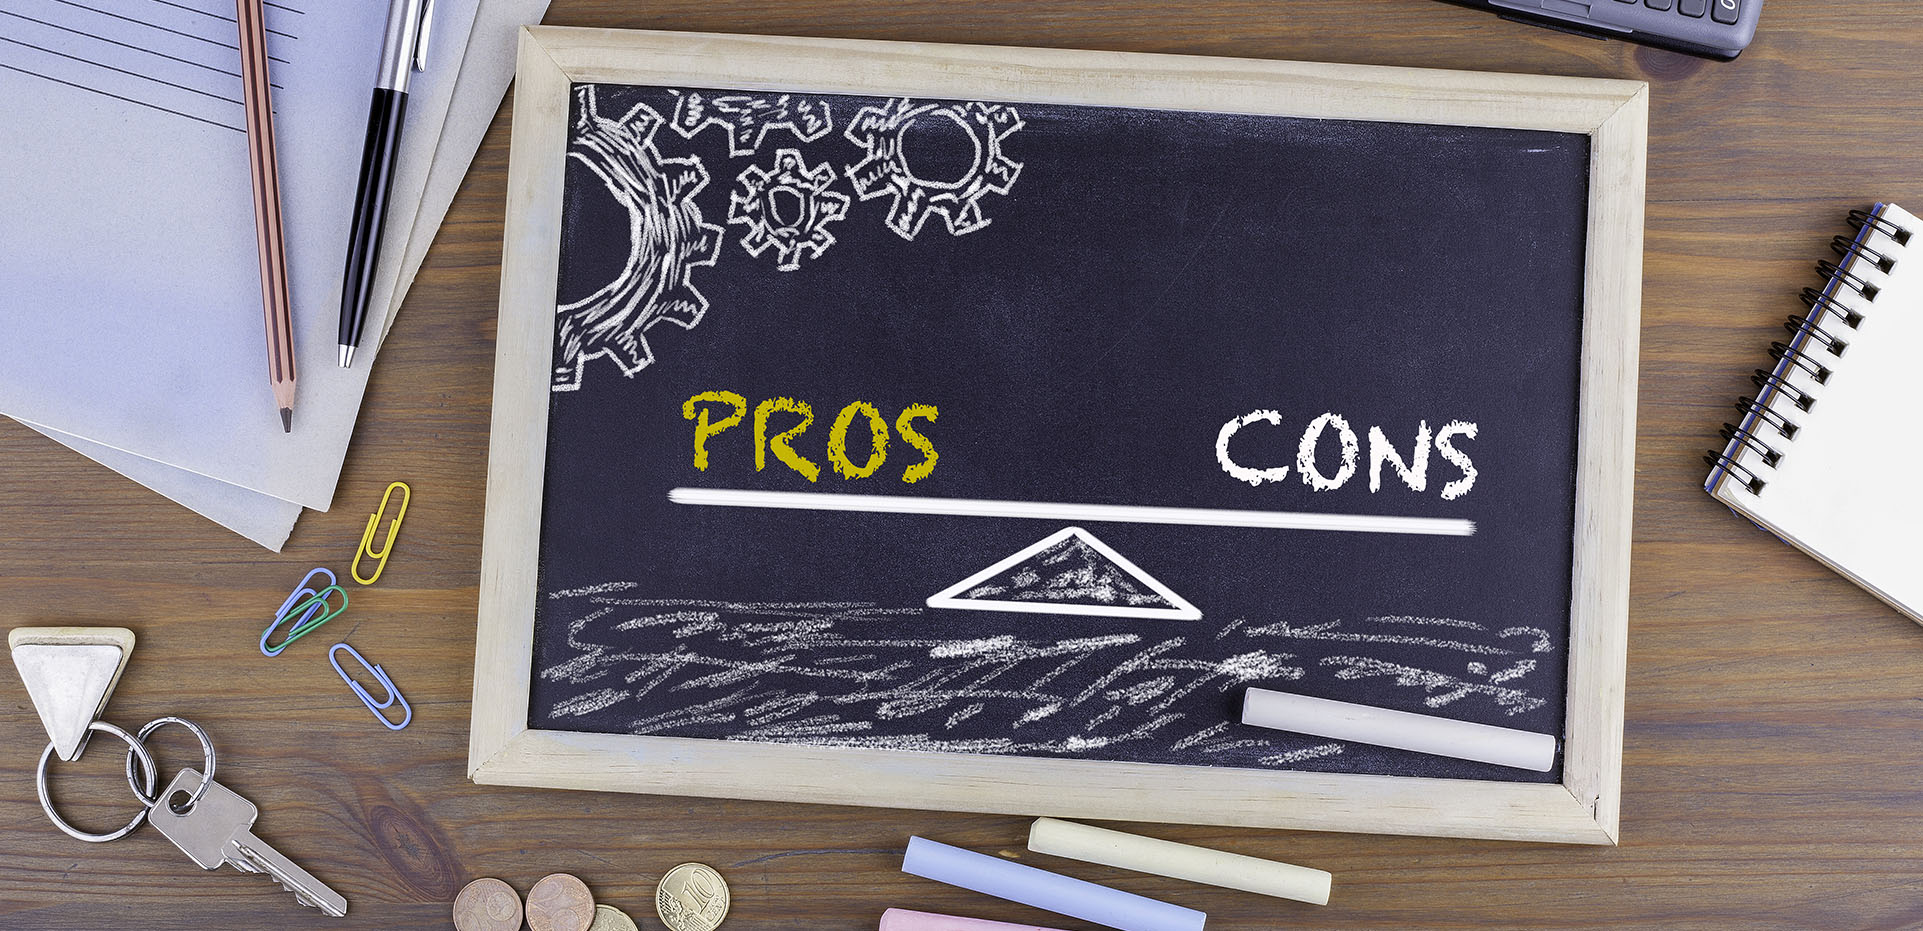 Image showing a chalk board split into "Pros" and "Cons"